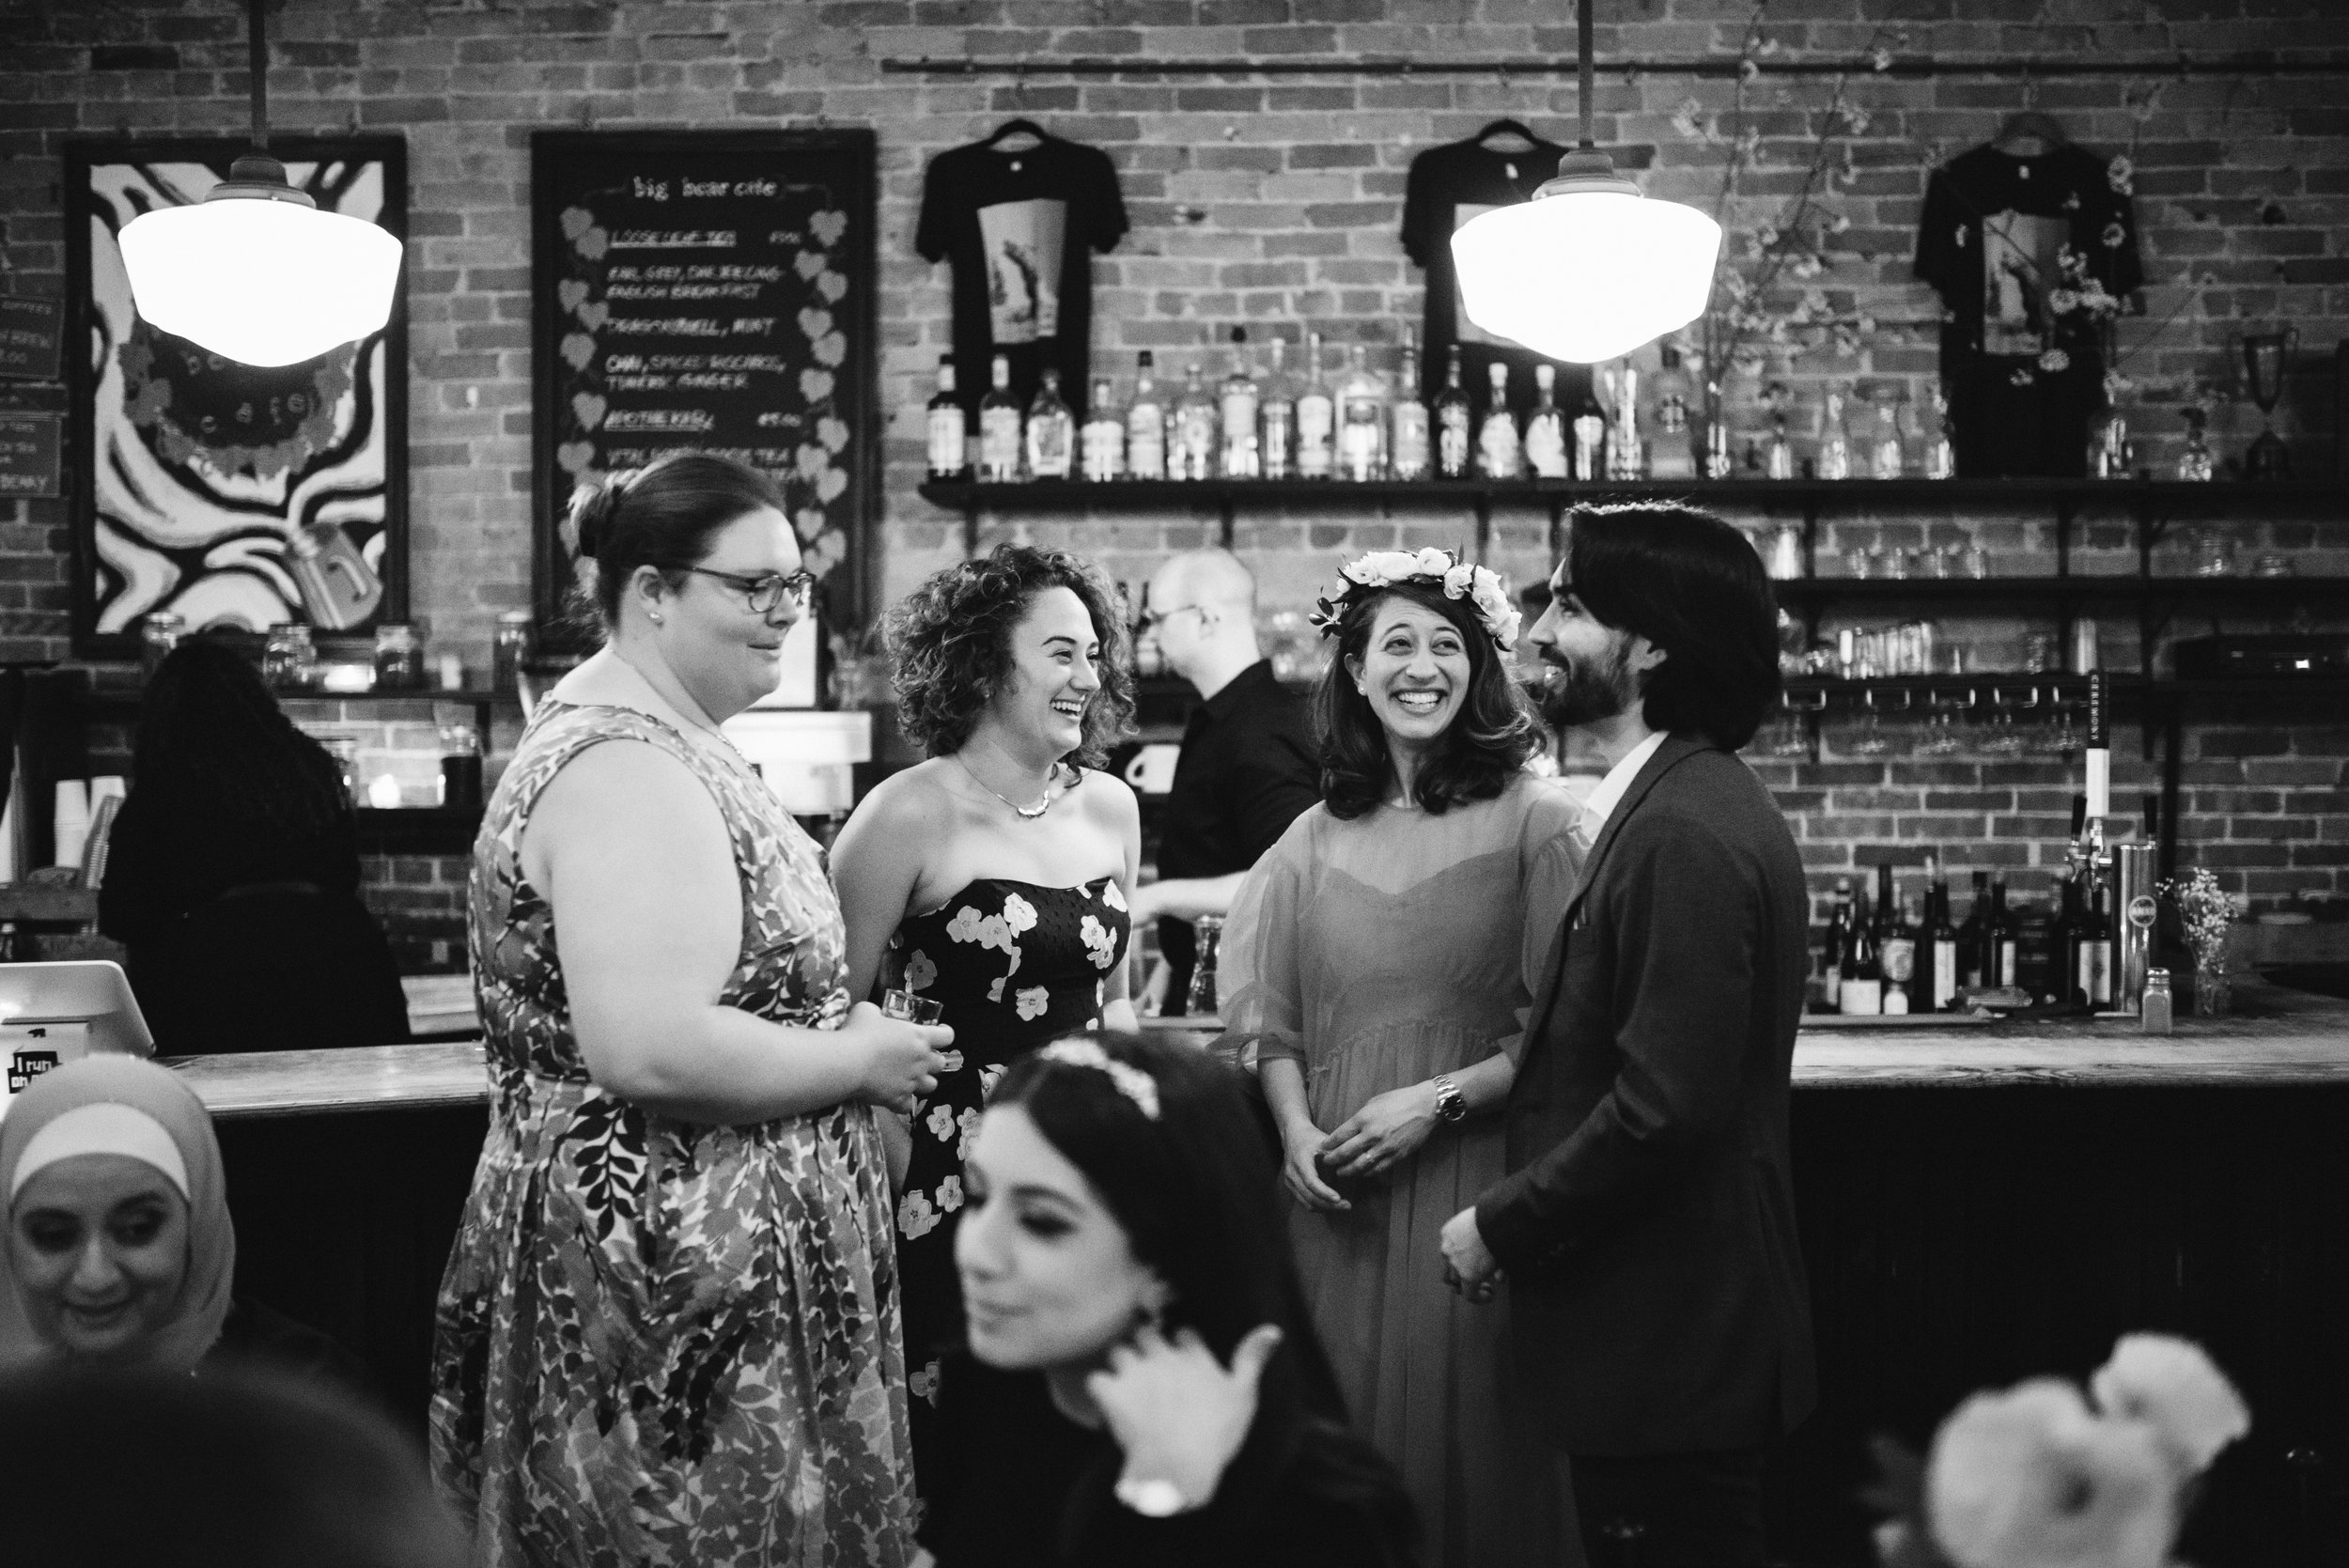  Washington DC, Baltimore Wedding Photographer, Intimate Wedding, Traditional, Classic, Big Bear Cafe, Black and White Photo of Couple Laughing with Friends 